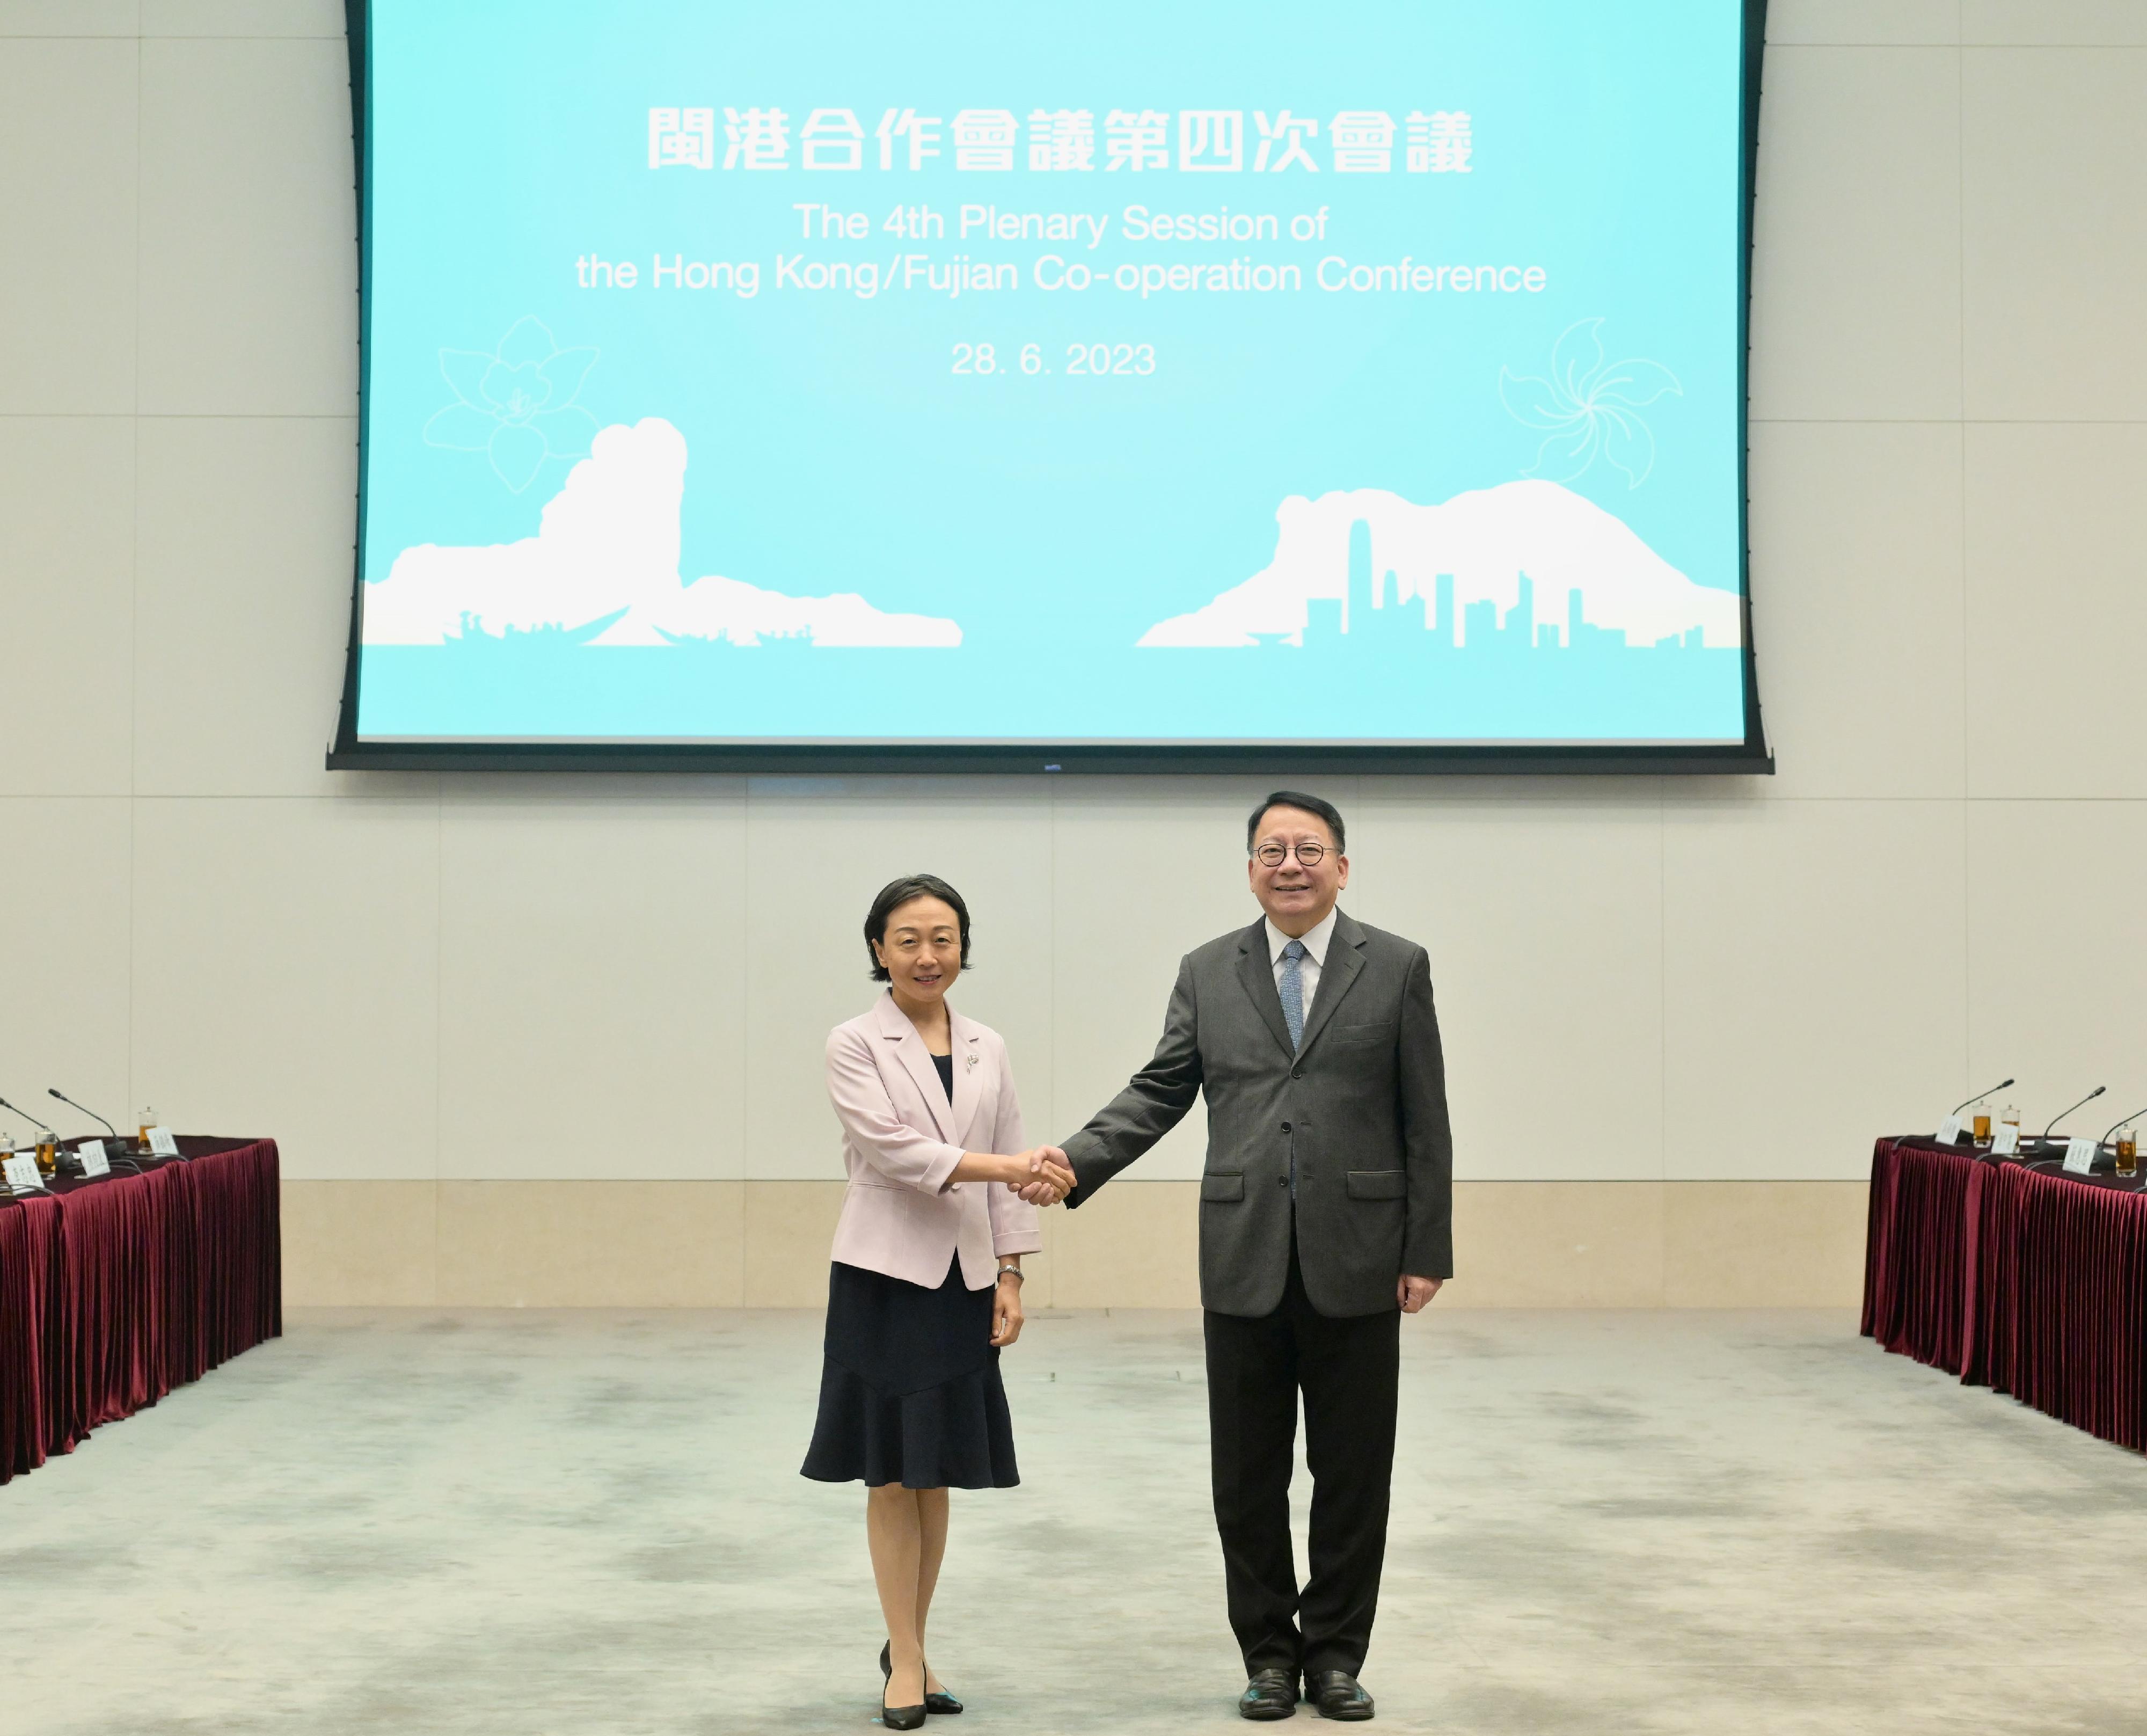 The Chief Secretary for Administration, Mr Chan Kwok-ki (right), and the Executive Vice Governor of Fujian Province, Ms Guo Ningning (left), co-chaired the Fourth Plenary Session of the Hong Kong/Fujian Co-operation Conference today (June 28) in Hong Kong.
